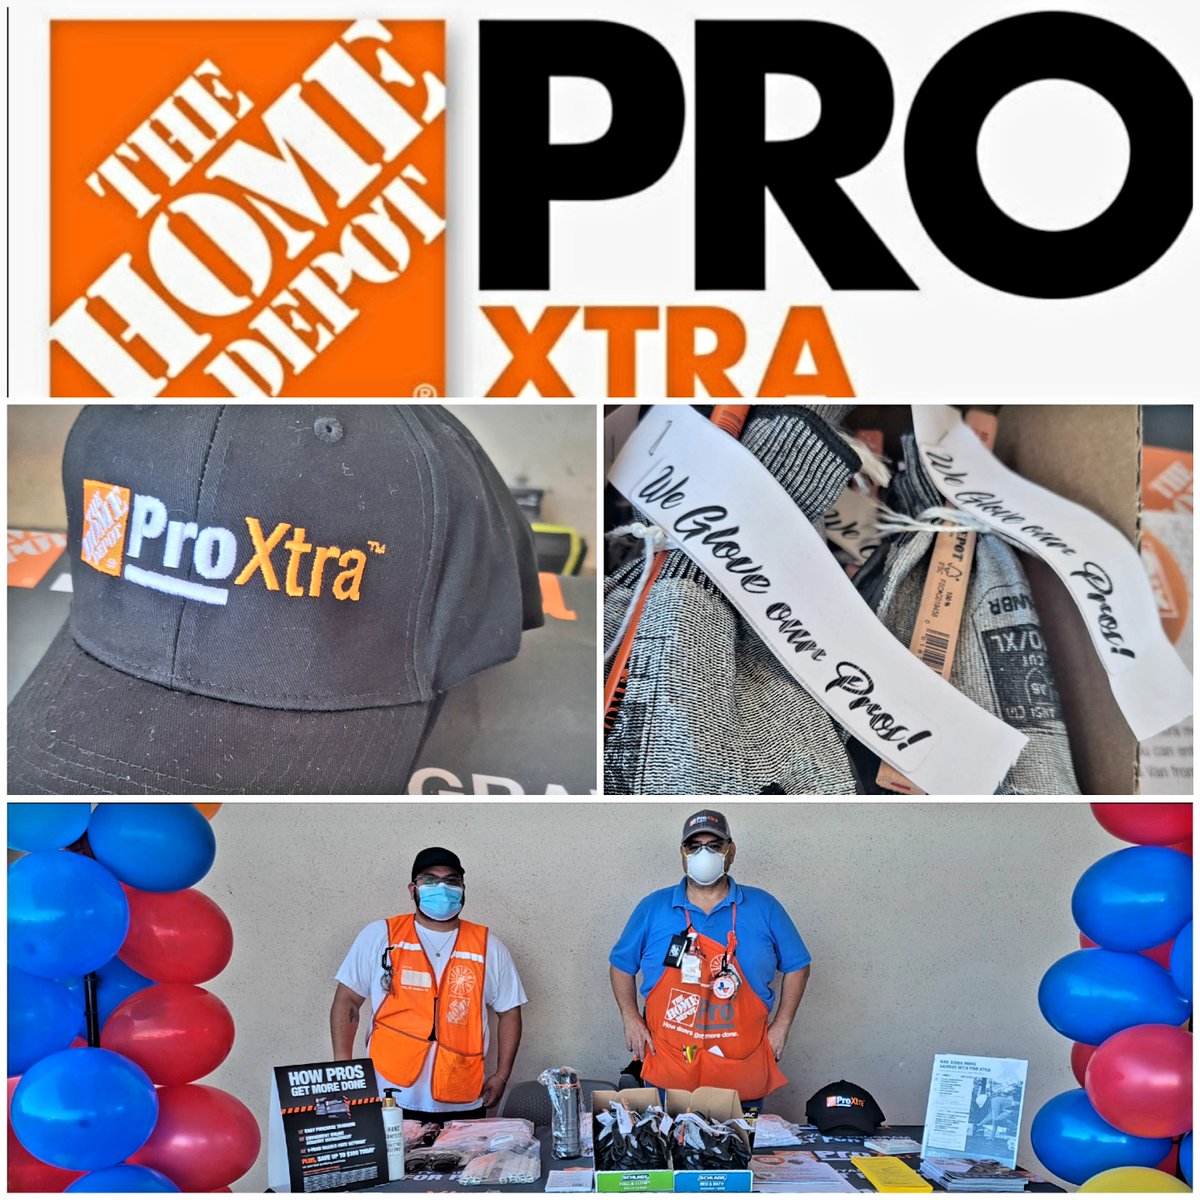 #ProEvent going on now at #THD6564! 🧤We GLOVE our Pros! Get it? 🧤 ProDesk Supervisor @PeteGarpro & ProLoader David signing up Pros and passing out gifts #ProXtra #PoweroftheGulf @bka1220 @LisaCallin @DouglasCurtrig1 @Jennifer_HD6564